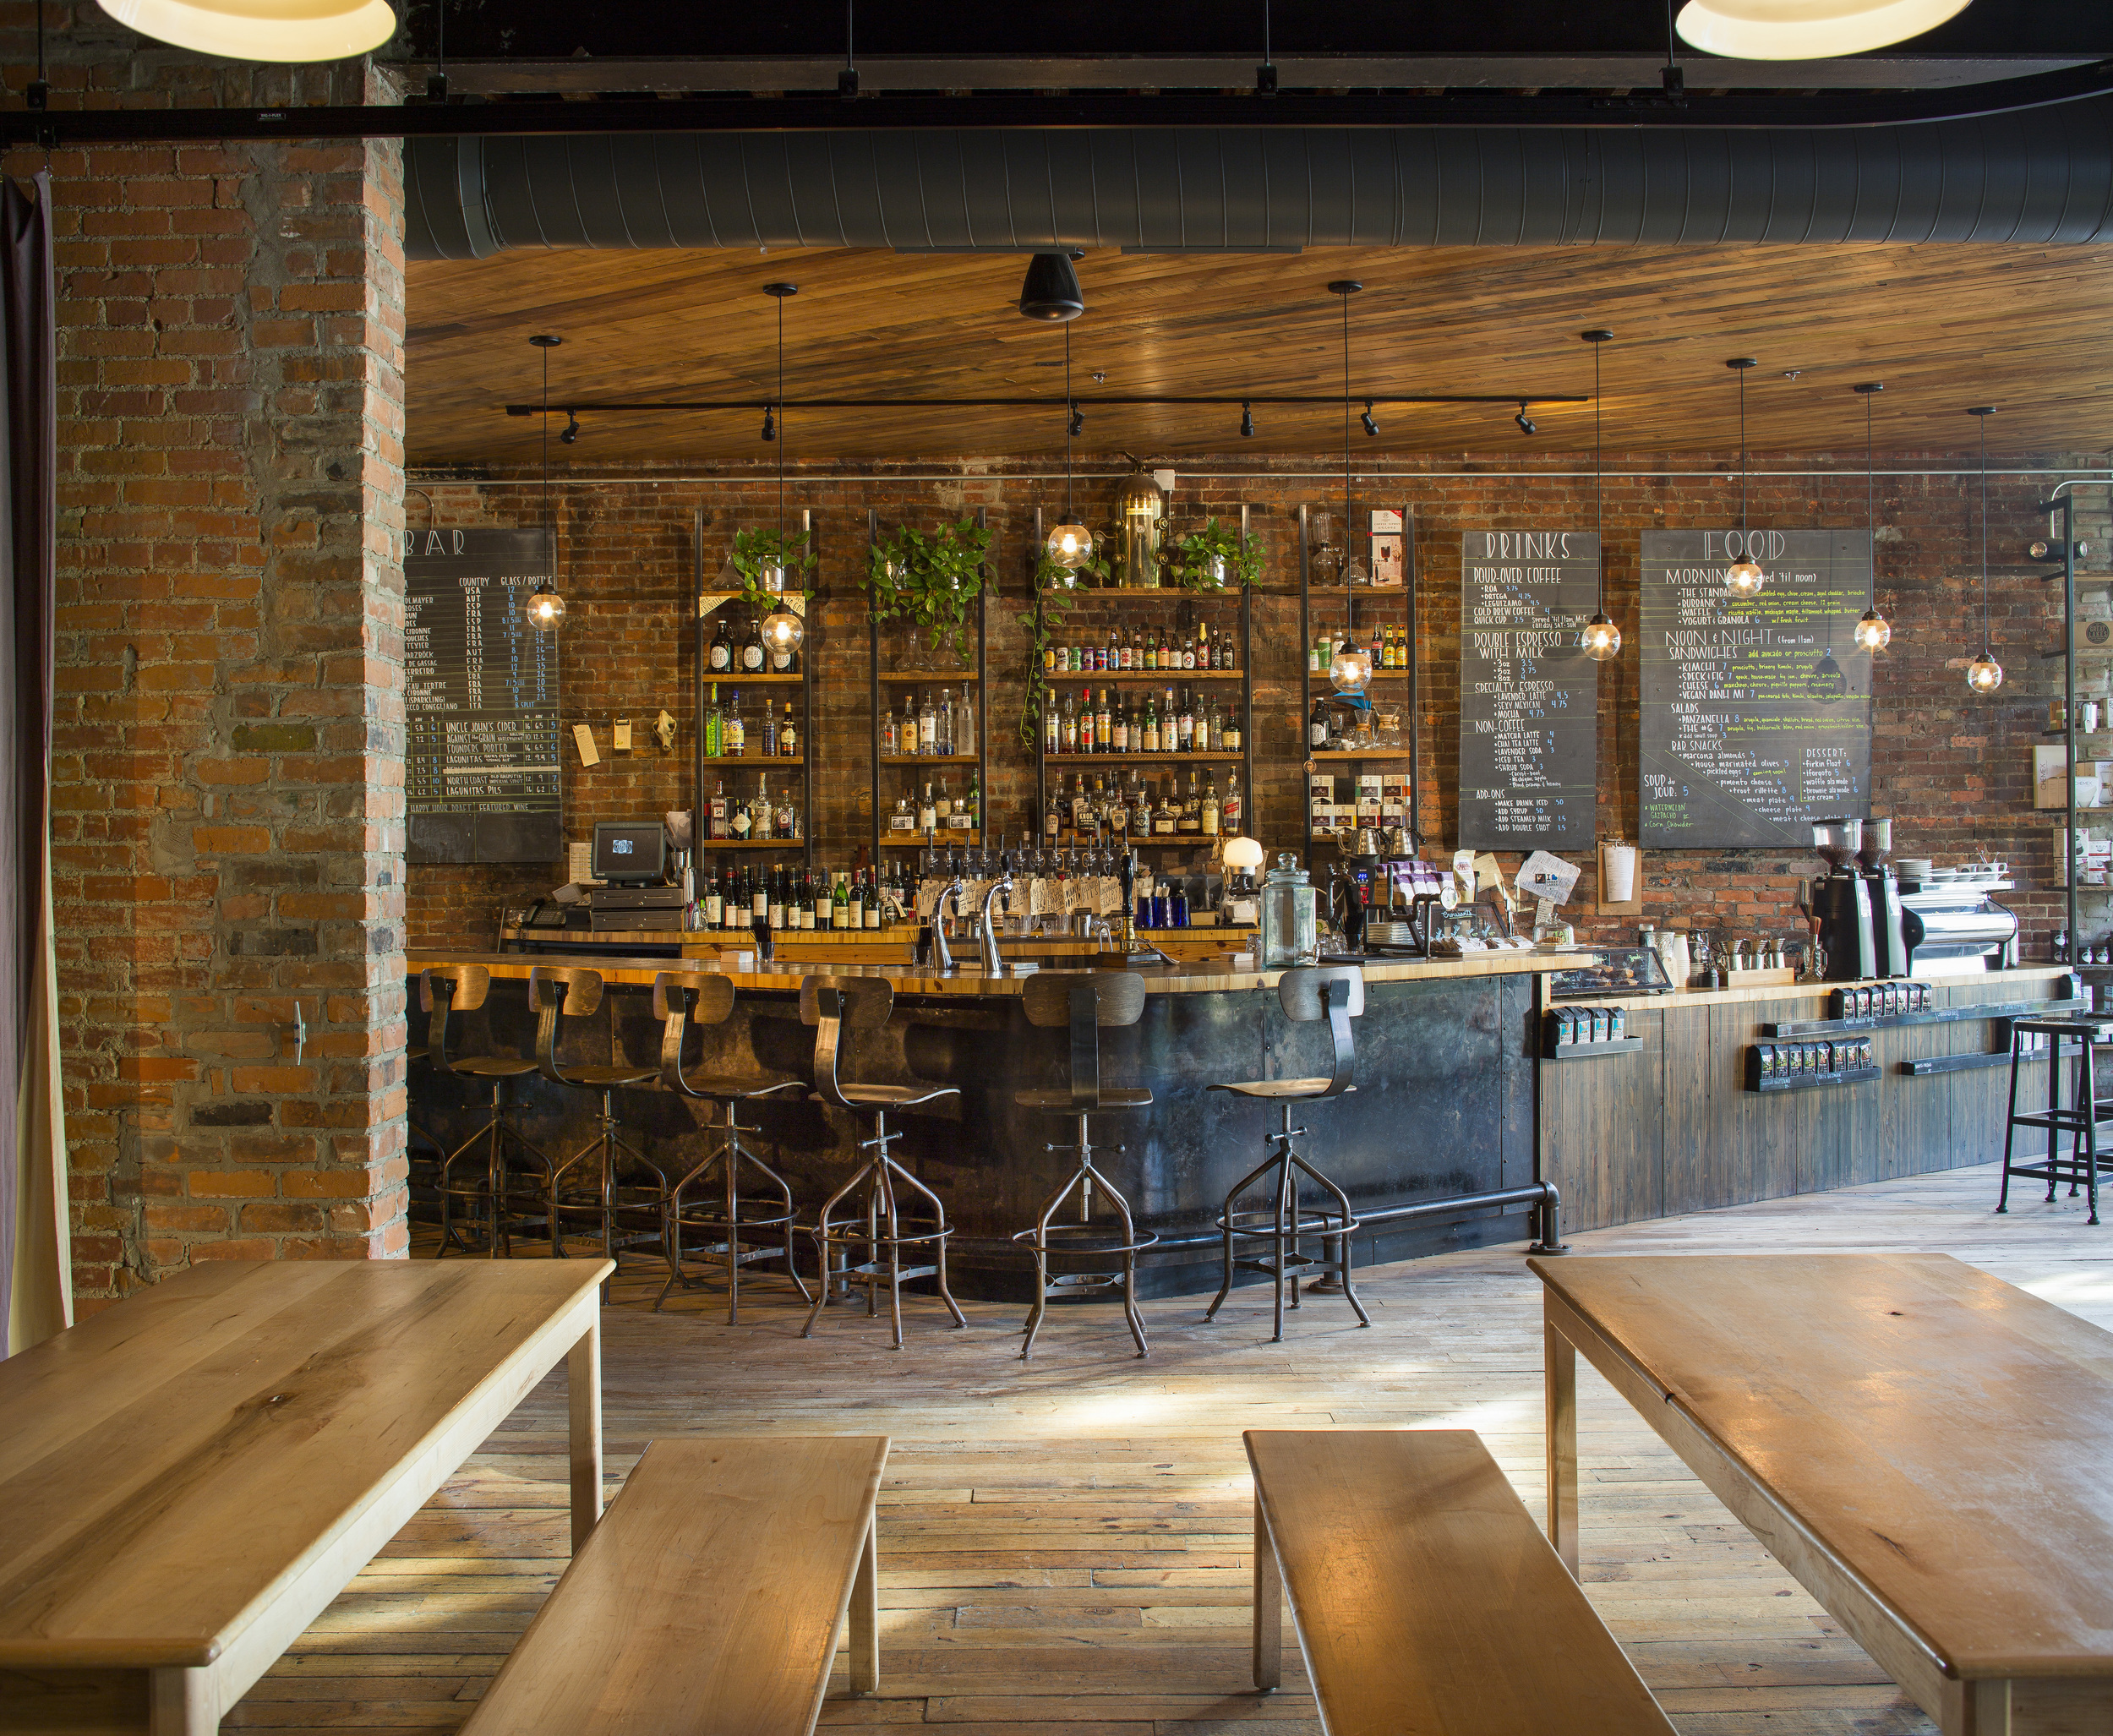   Great Lakes Coffee&nbsp;Institute for Advanced Drinking 2014 Detroit Home Design Award  